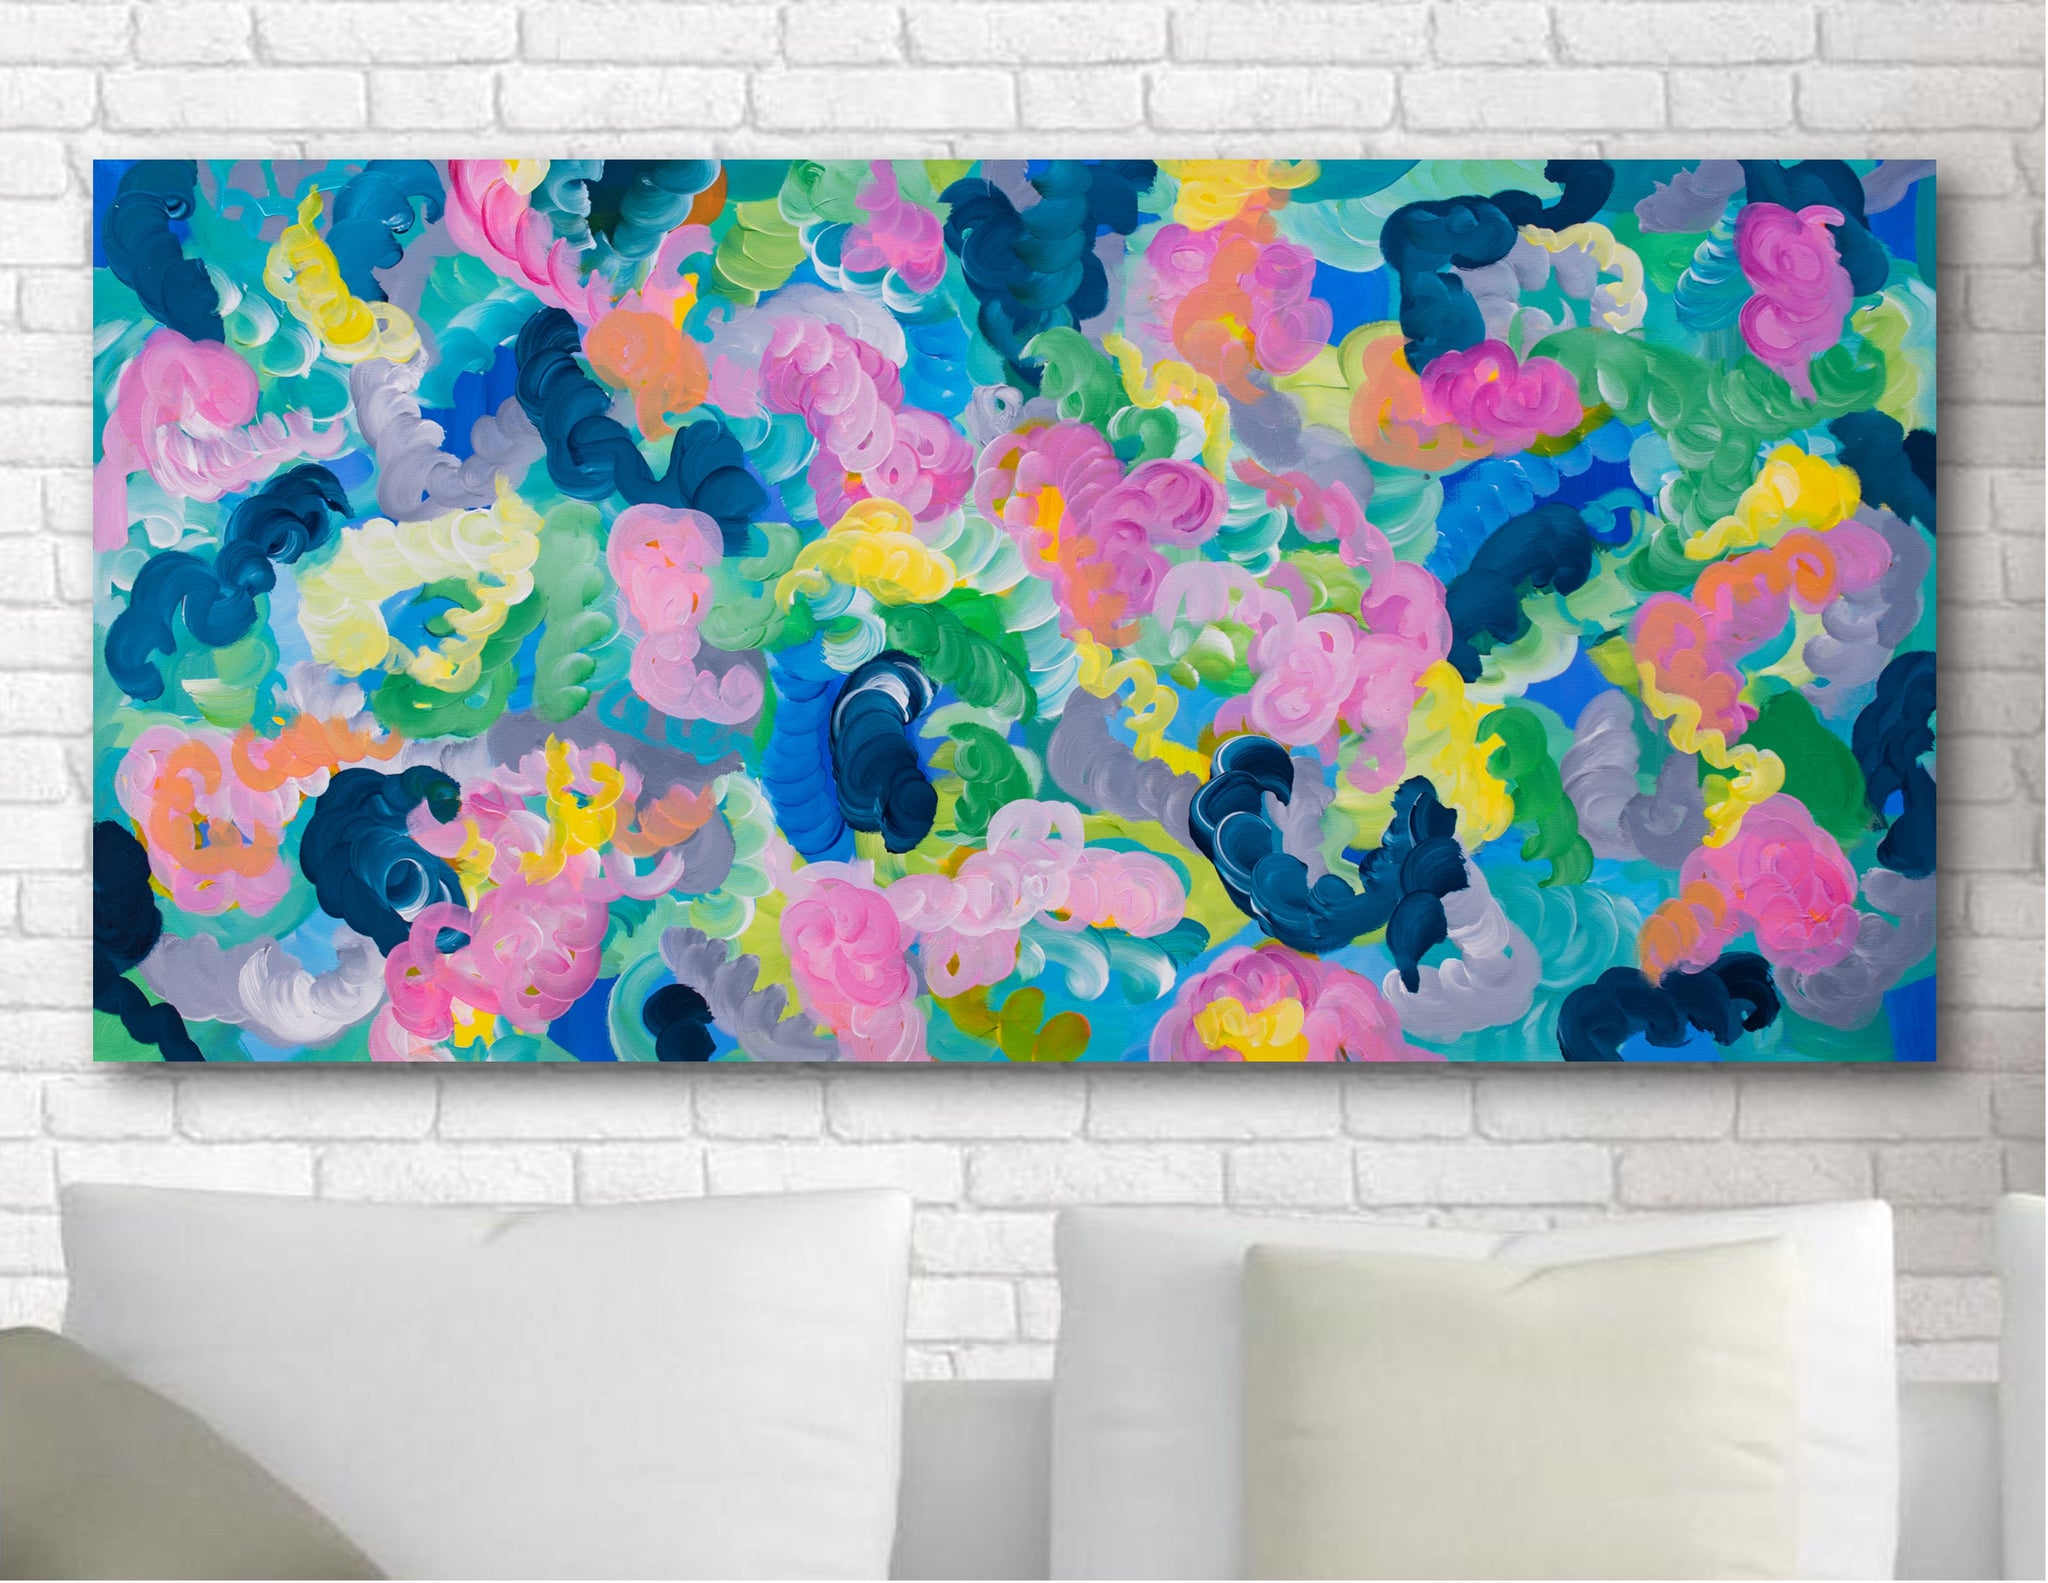 Childhood, Abstract Swirls Painting on Canvas, 24"x48"